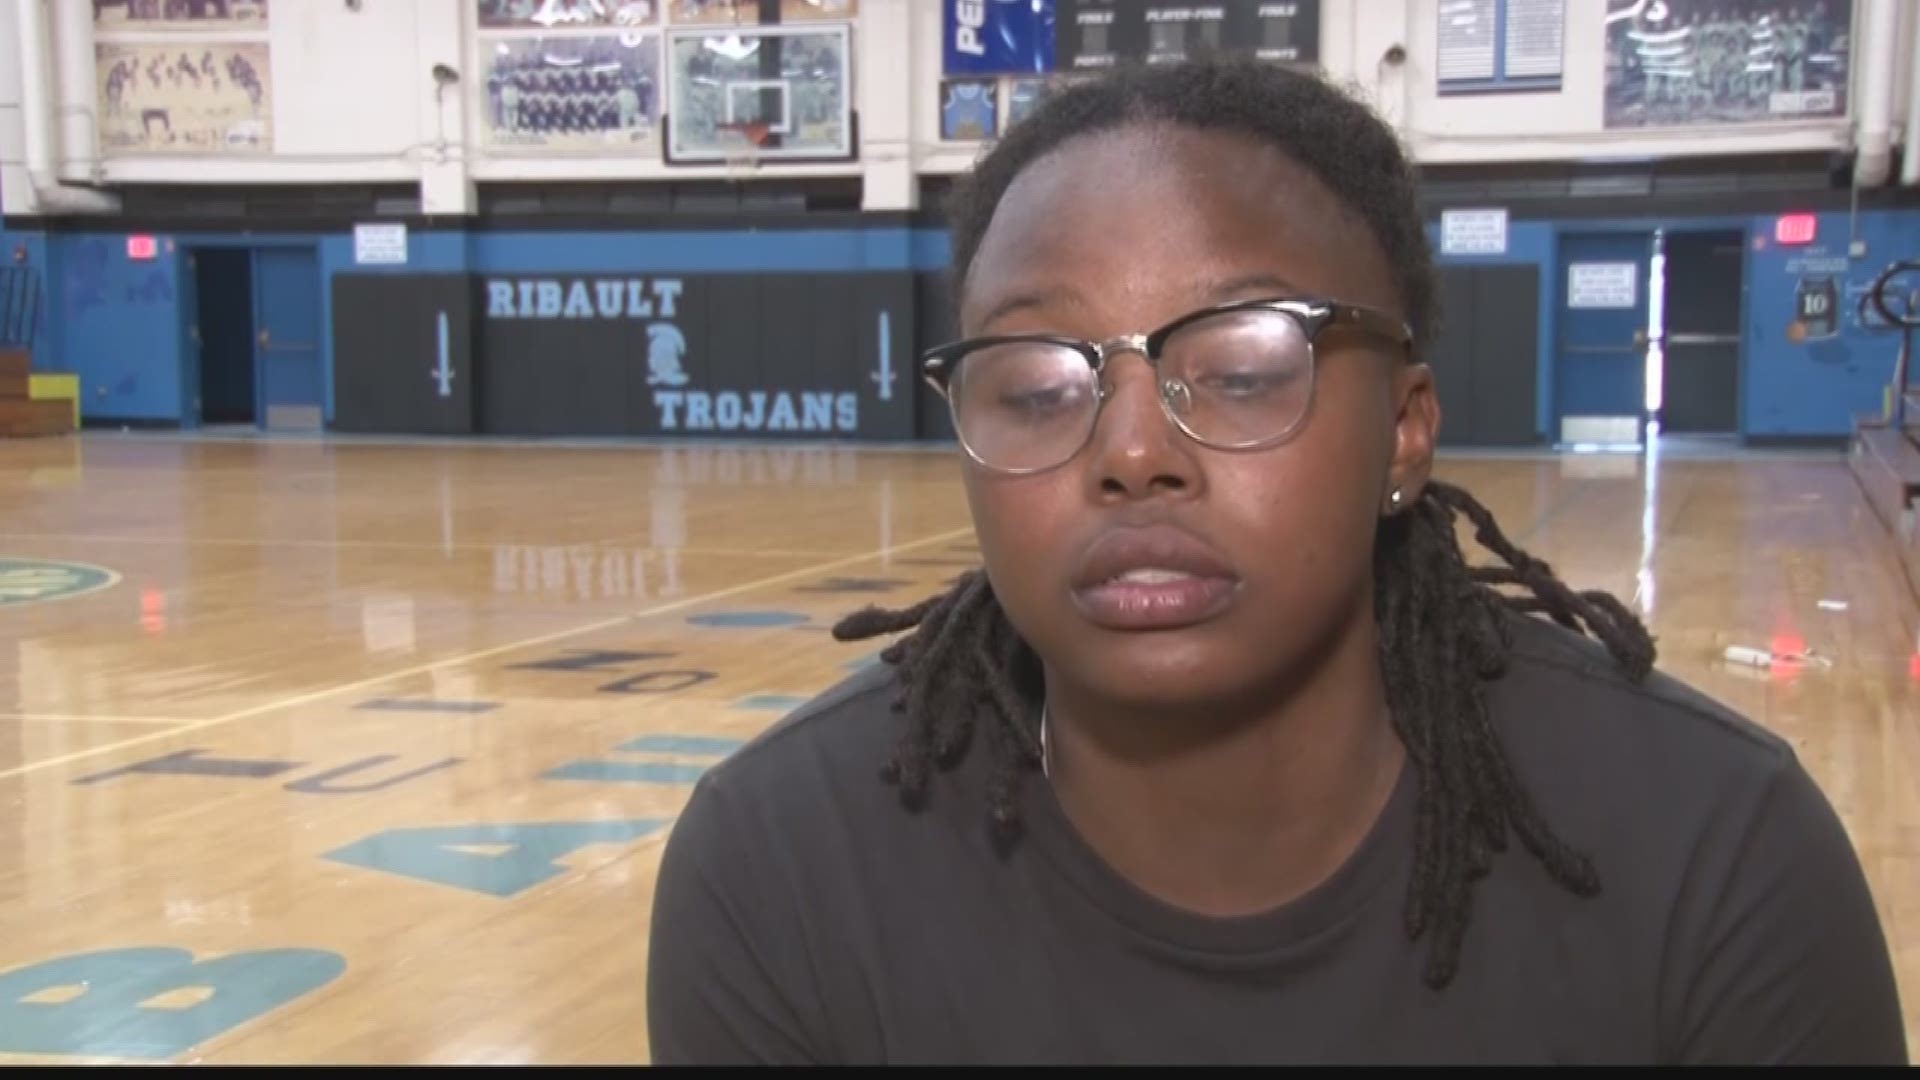 This week's athlete of the week is Ribault basketball star Day'neisha Banks.